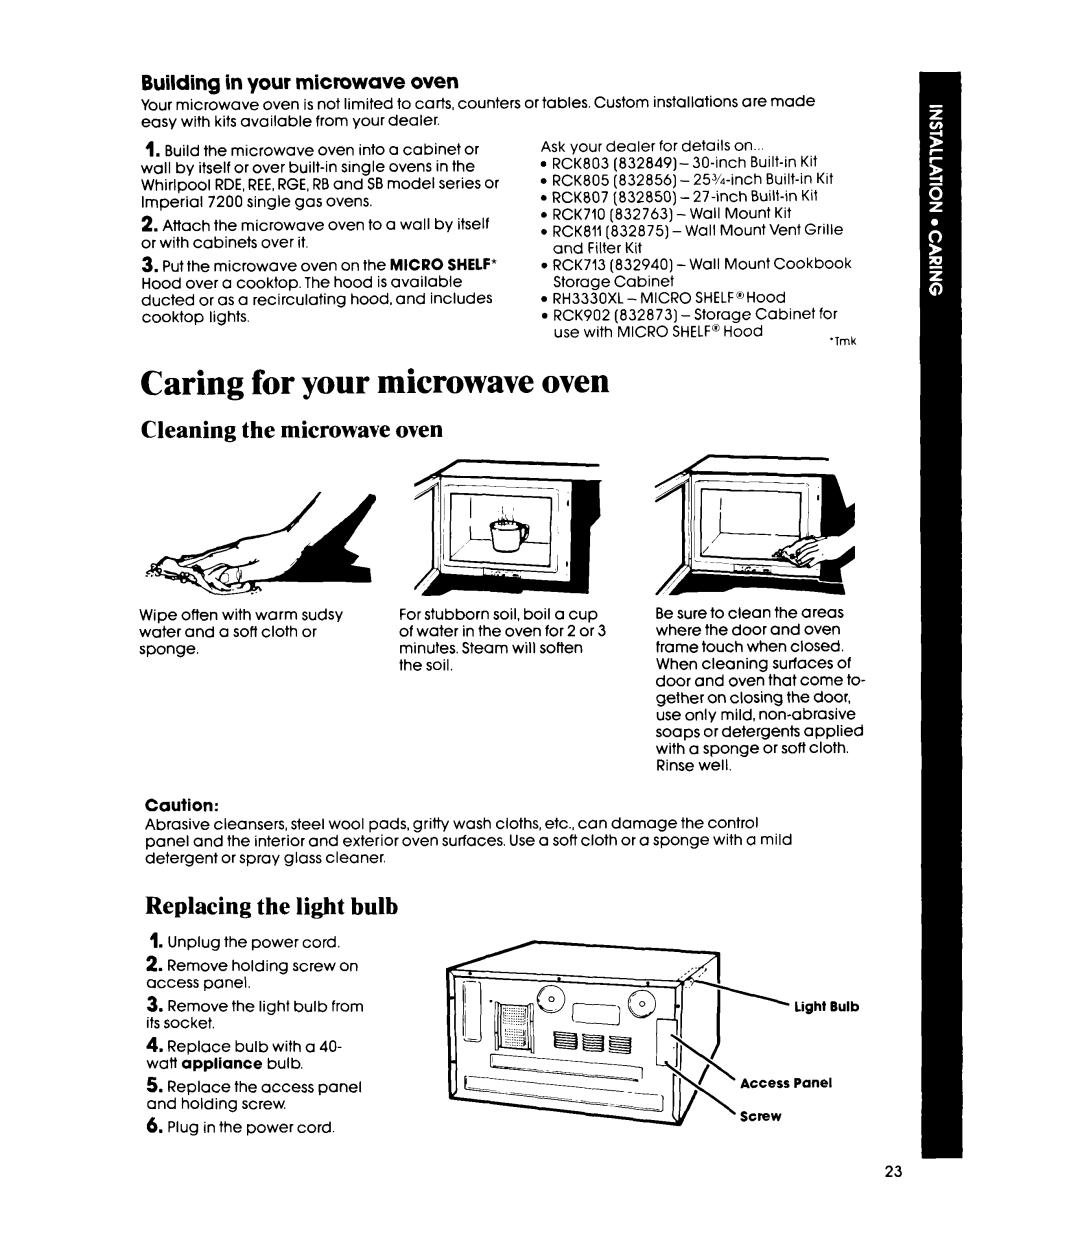 Whirlpool MW856EXP, MW8580XP manual Caring for your microwave, Cleaning the microwave oven, Replacing the light bulb 